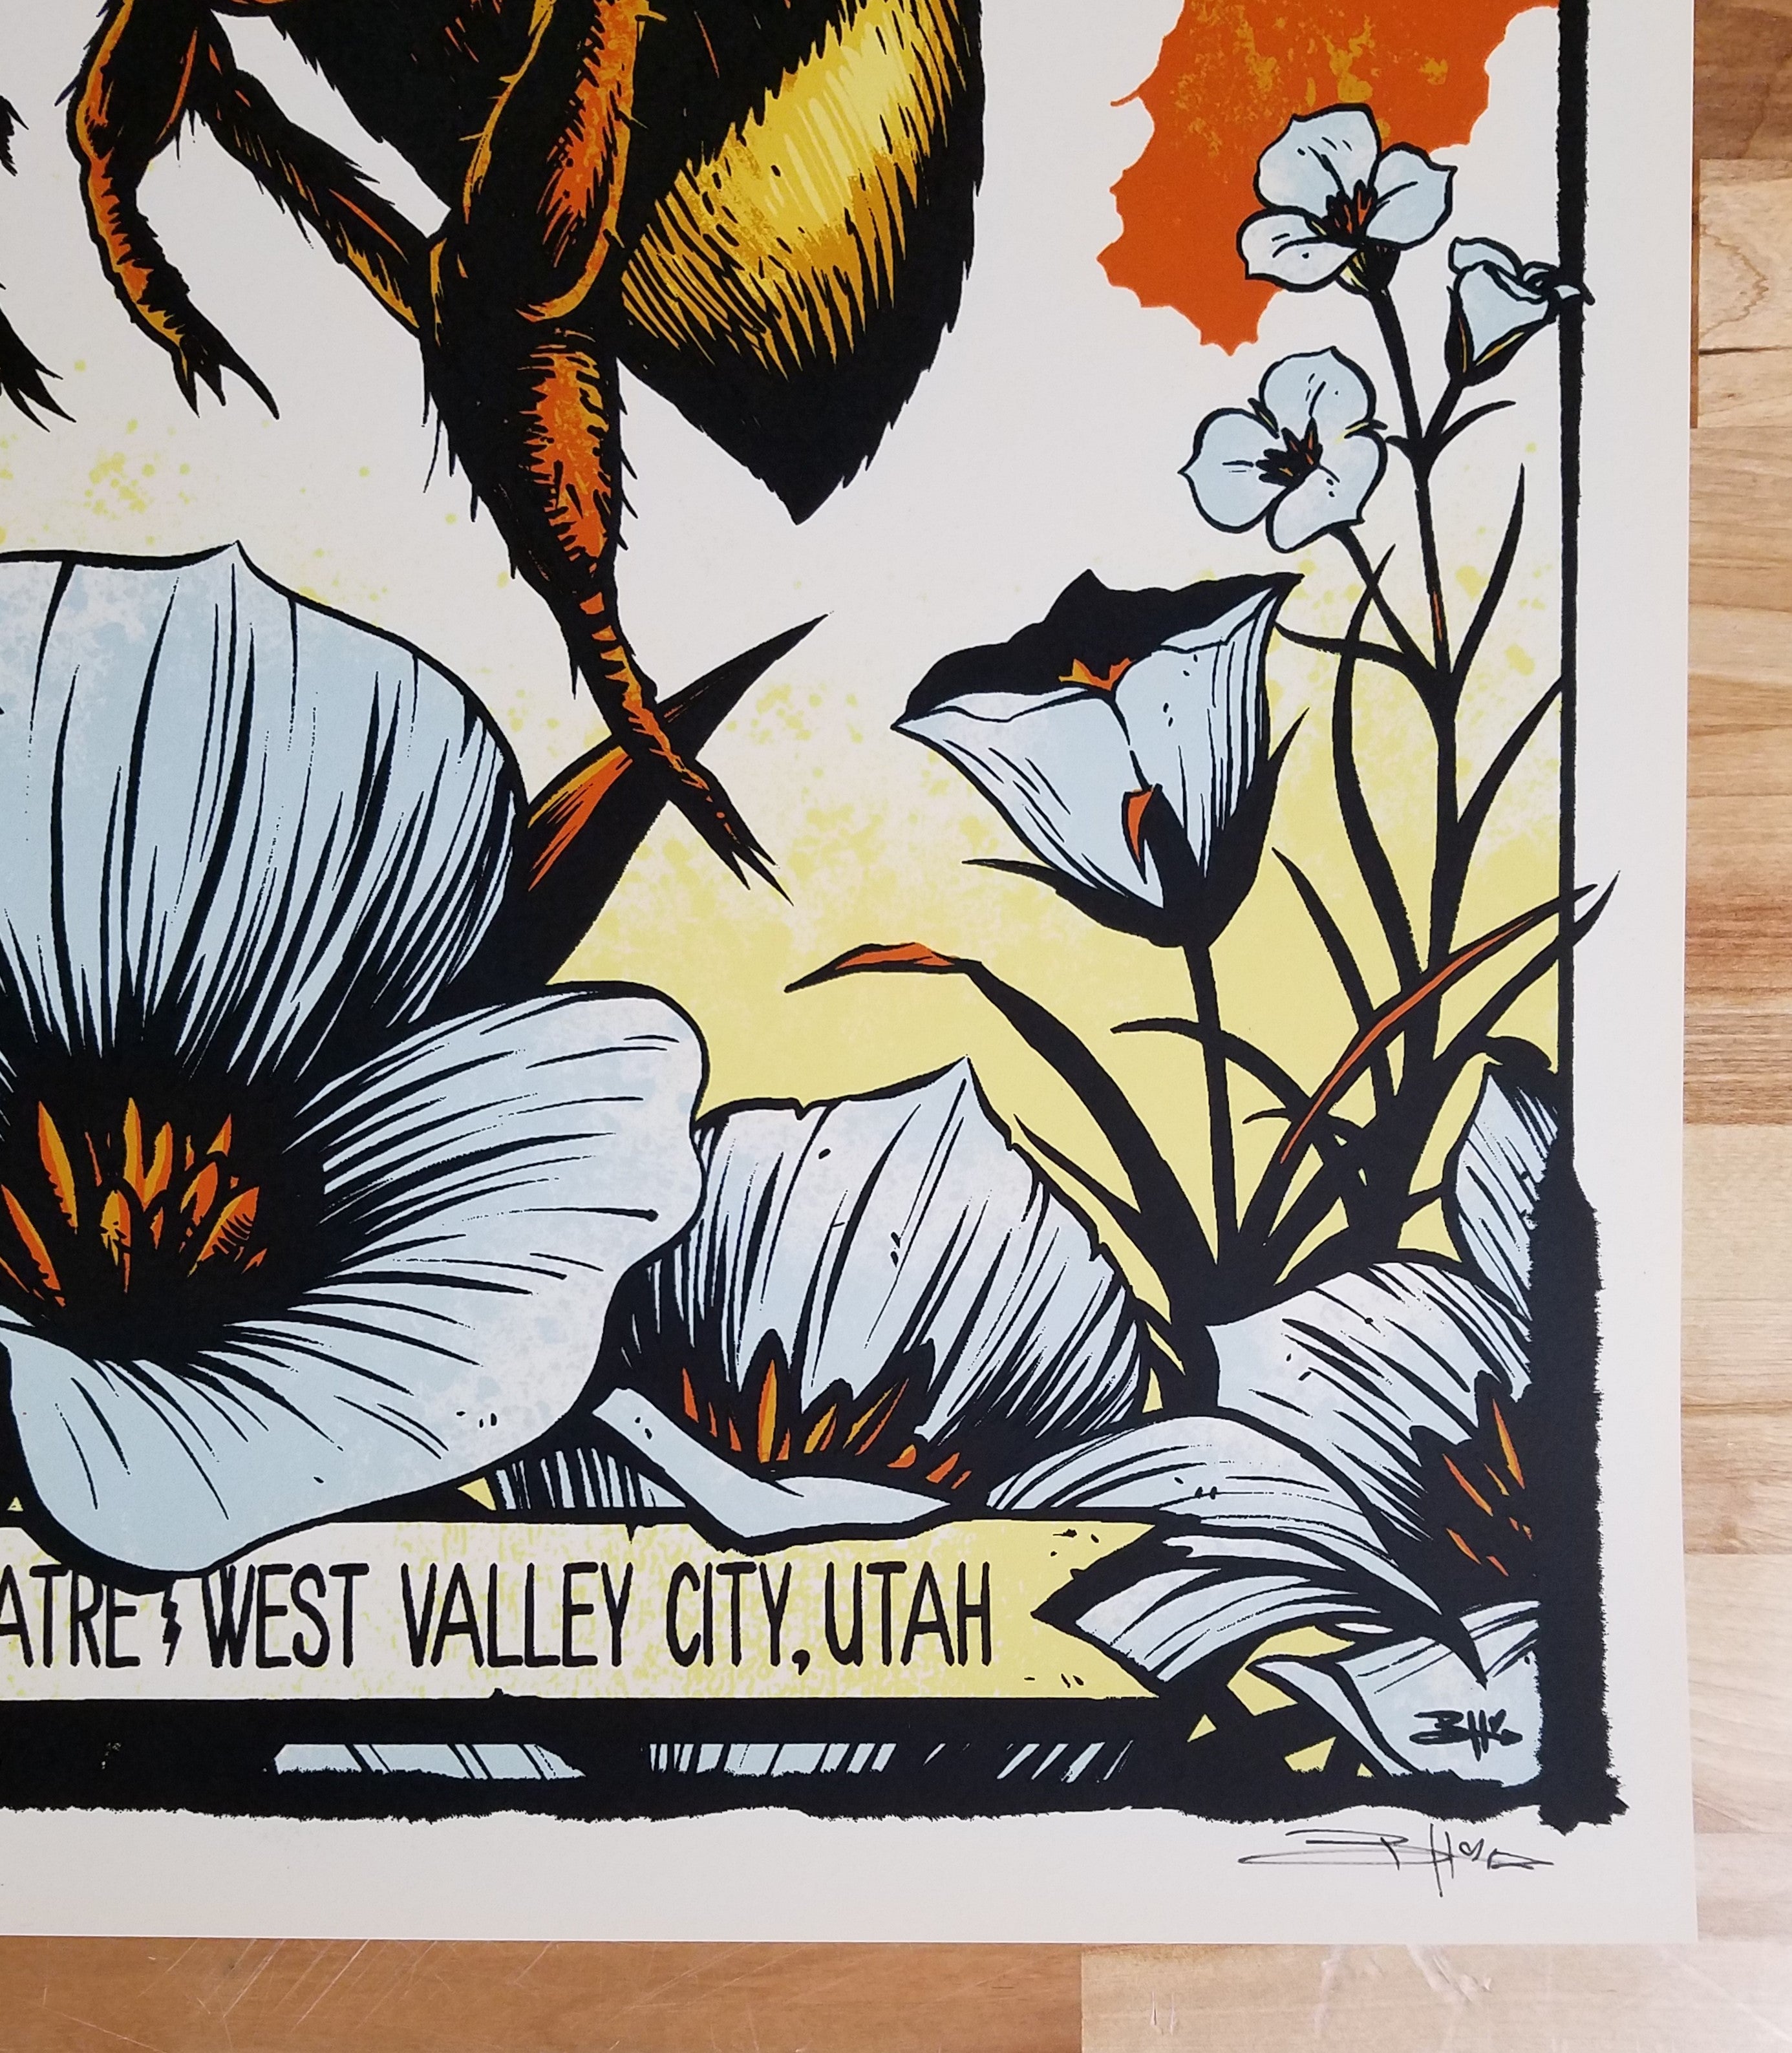 Title:  Dave Matthews Band West Valley City Poster - 8/27/2019  Poster artist: Brandon Heart  Edition:   xx/50 s/n  Type:  Screen print  Size:  18" x 24"  Location:  West Valley City, Utah  Venue:   Usana Amphitheatre  Notes:   6-color print.  Prints are rolled in kraft paper and shipped in a sturdy cardboard tube protected with bubble wrap on each end of the inside.  Be sure to check out our other listings for more rare, sold out & hard to find screenprints and posters!